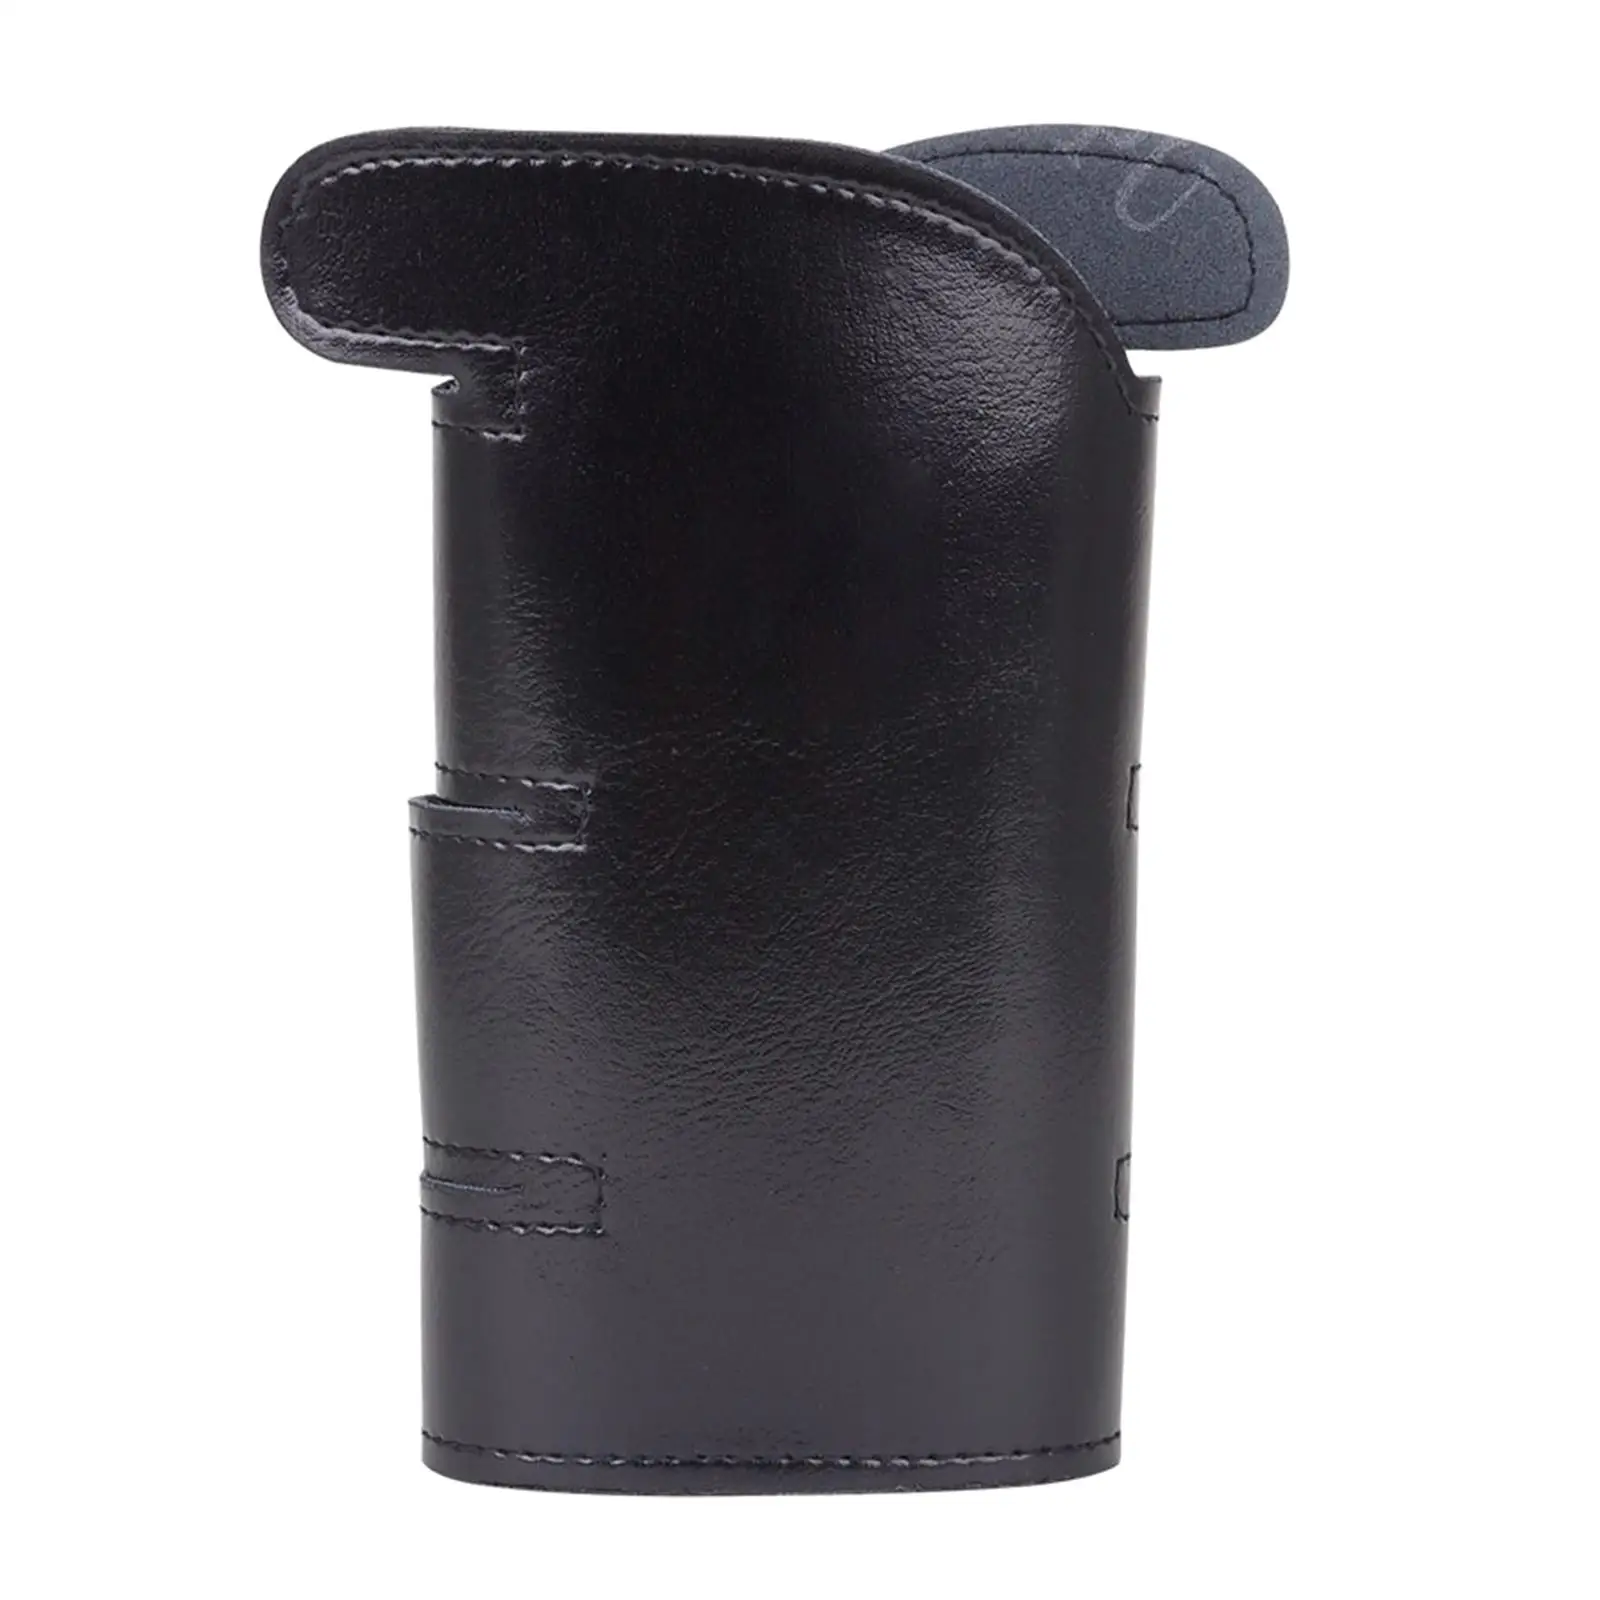 Trumpet Guard PU Leather Trumpet Protector Cover, Protection from